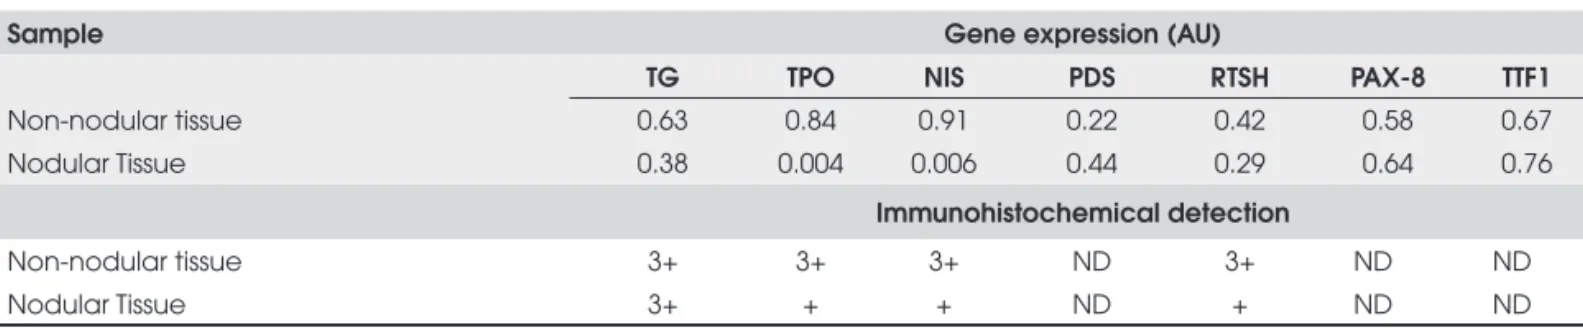 Table 4.  mRNA quantifi cation of TG, TSHR, NIS, PAX-8, TTF1 and PDS and Immunohistochemical analysis of TG, TSHR, NIS proteins in  nodular and non-nodular thyroid samples from patient 1